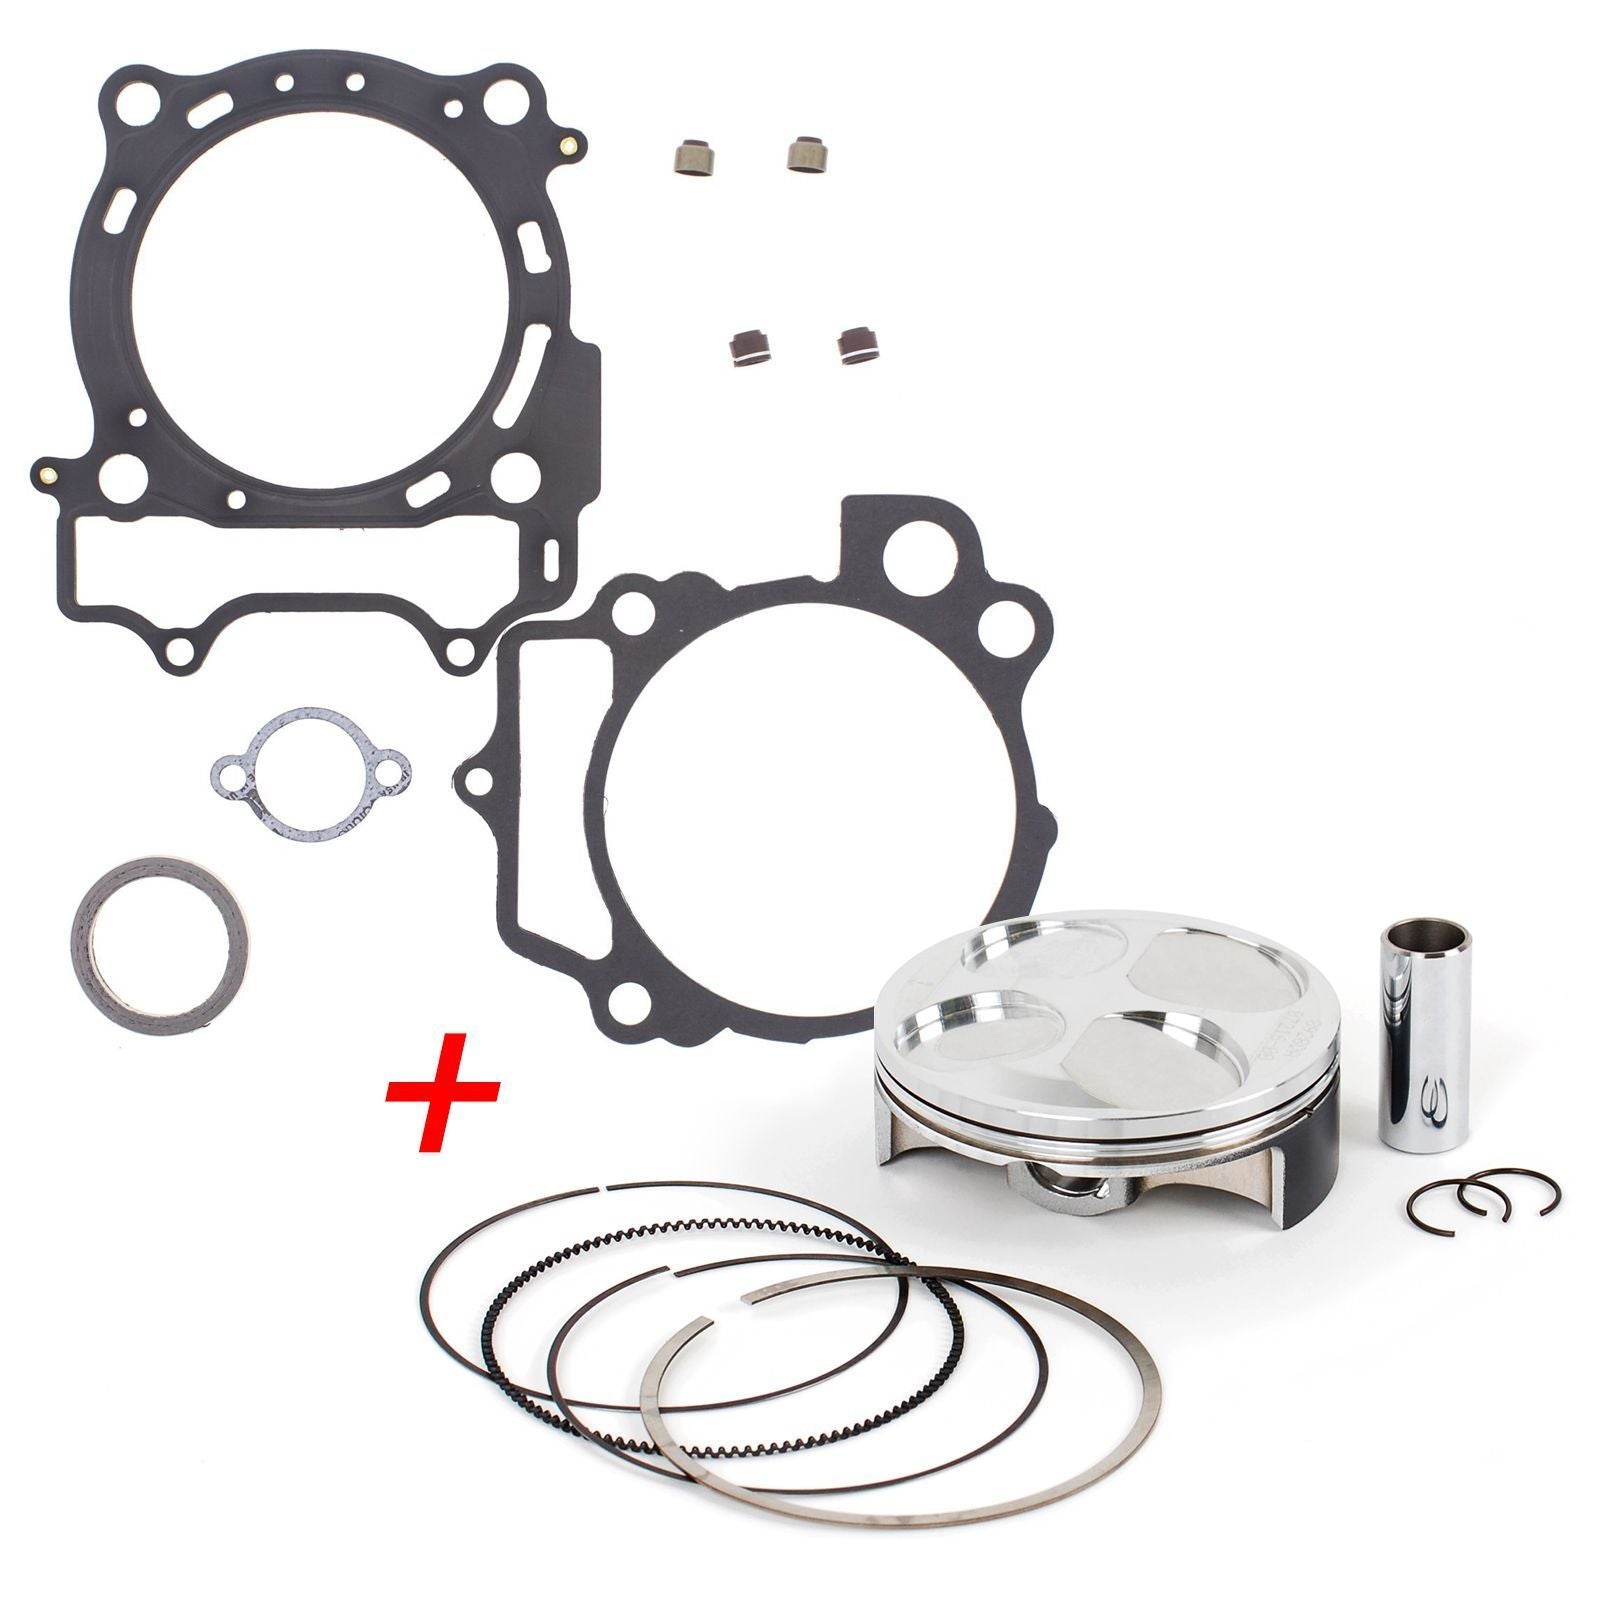 New Top End Rebuild Kit (A PRO) For Yamaha WR250F 2015-2019 #ERTY031AP